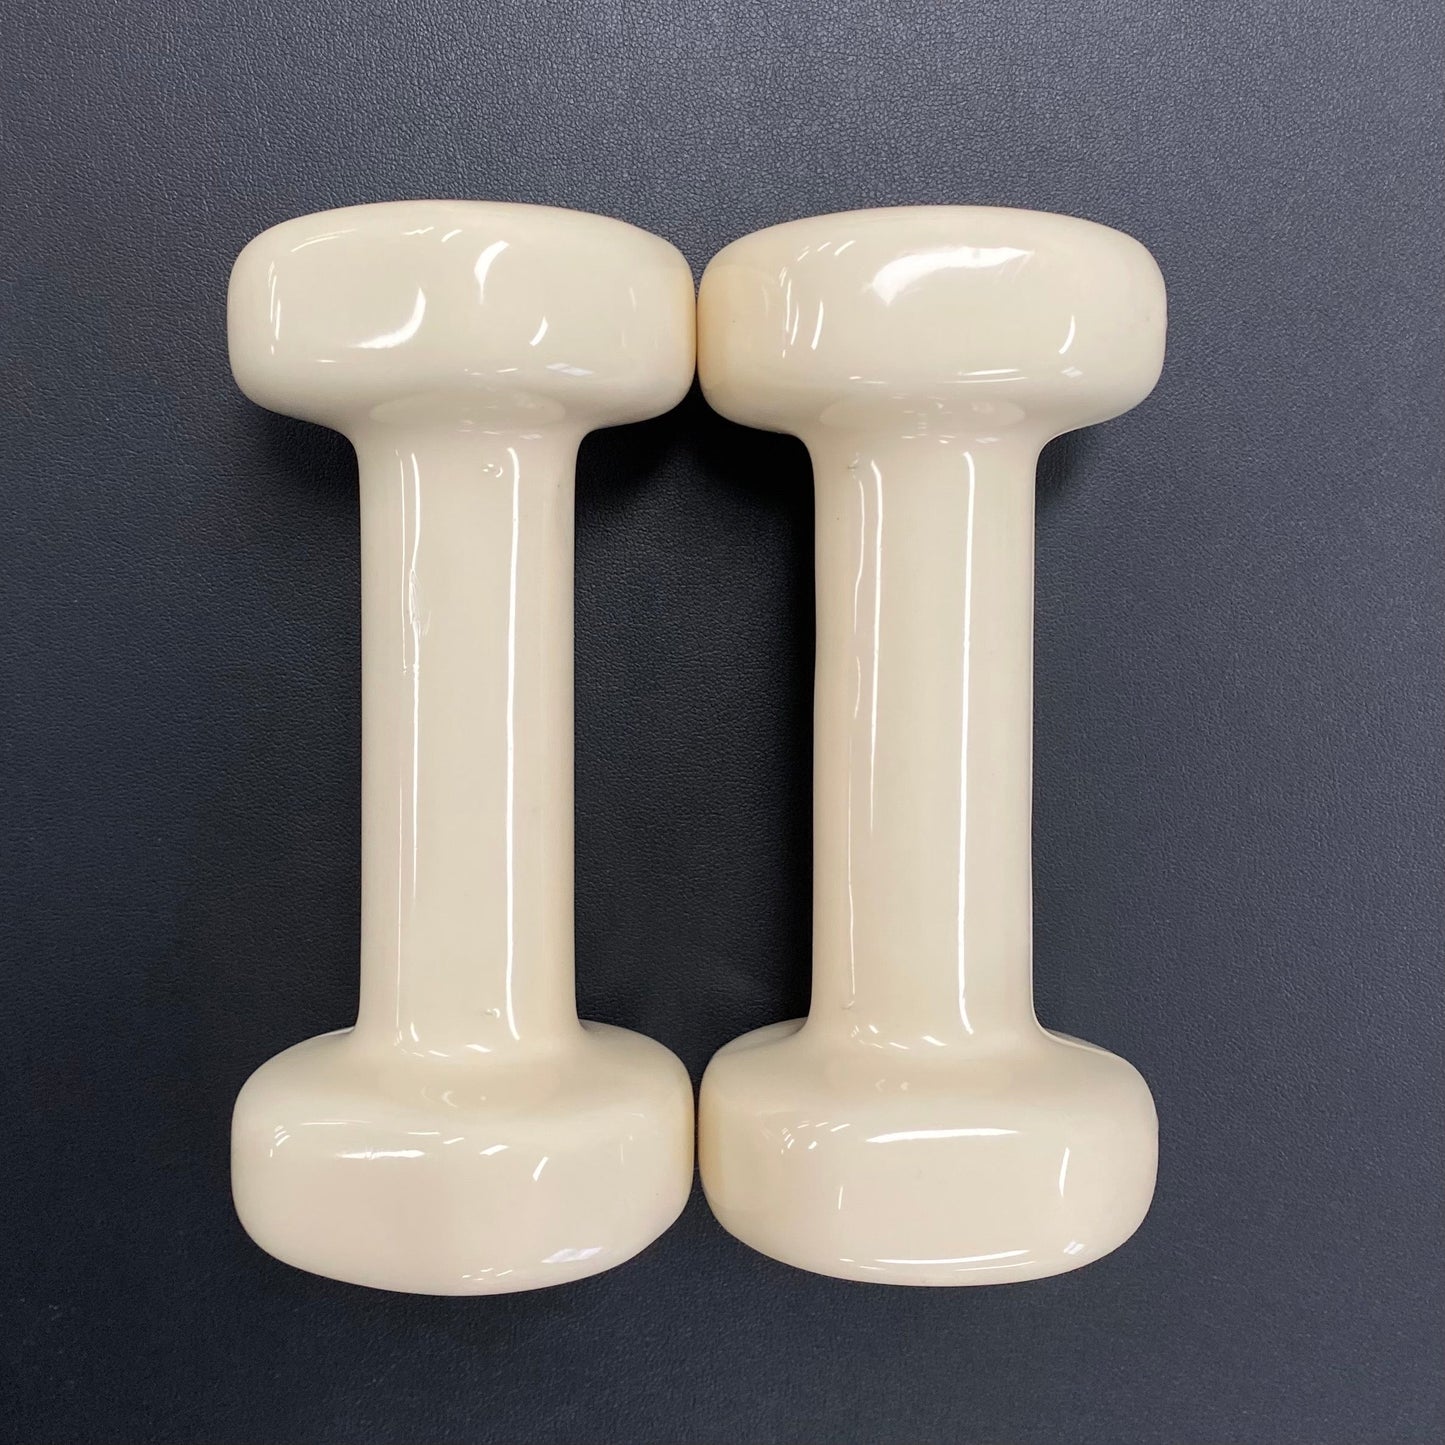 2kg Hand Held Weights- One pair